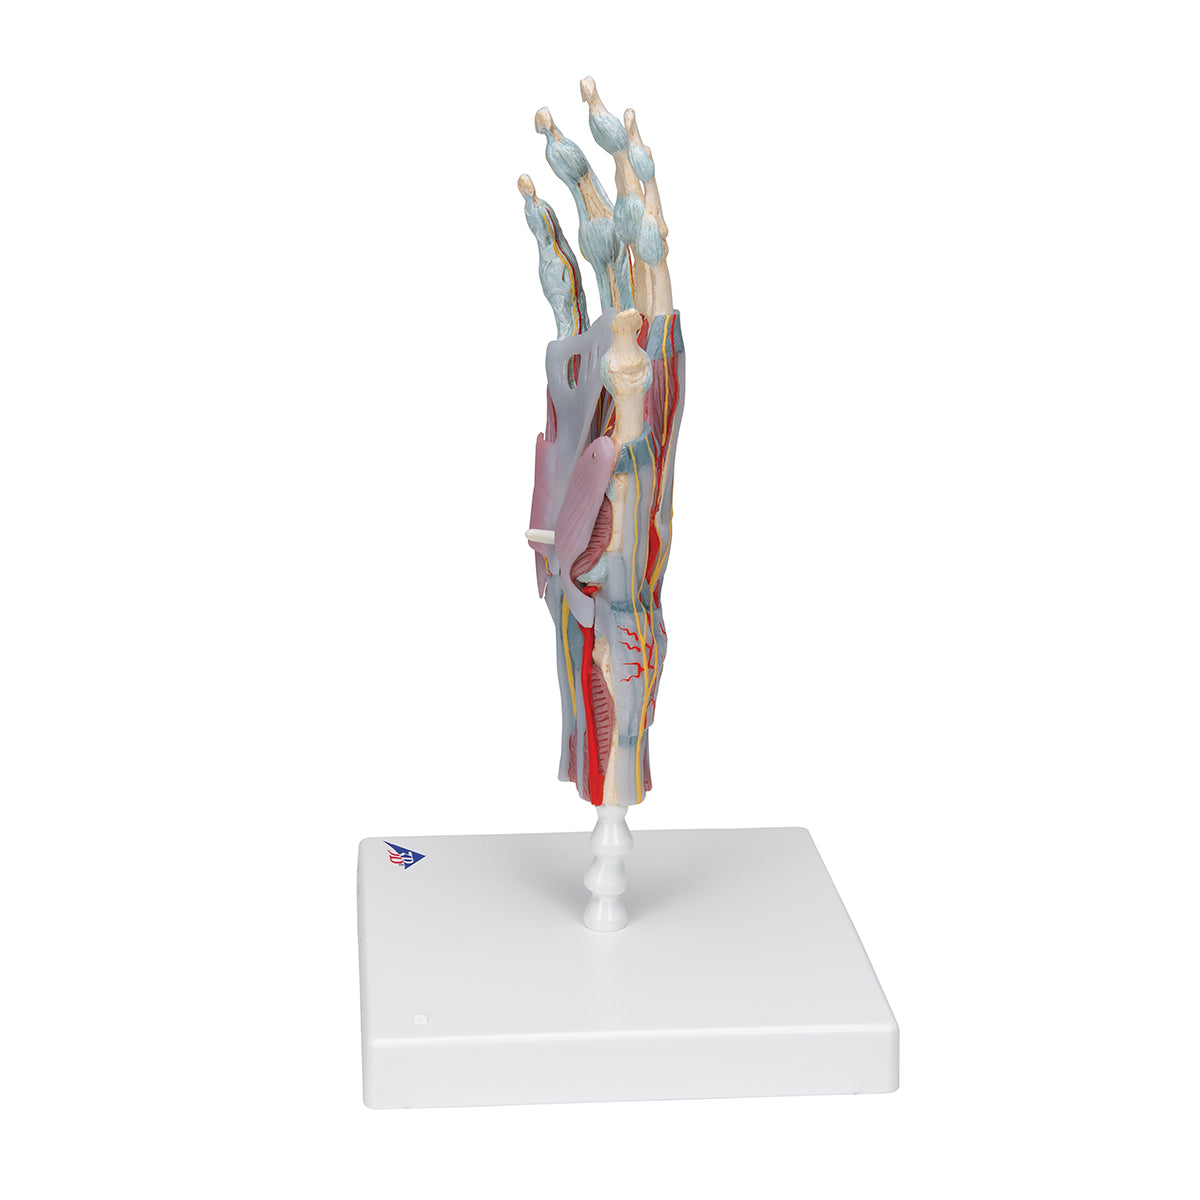 Complete hand model with ligaments, muscles, tendons, vessels and nerves - can be separated into 4 parts